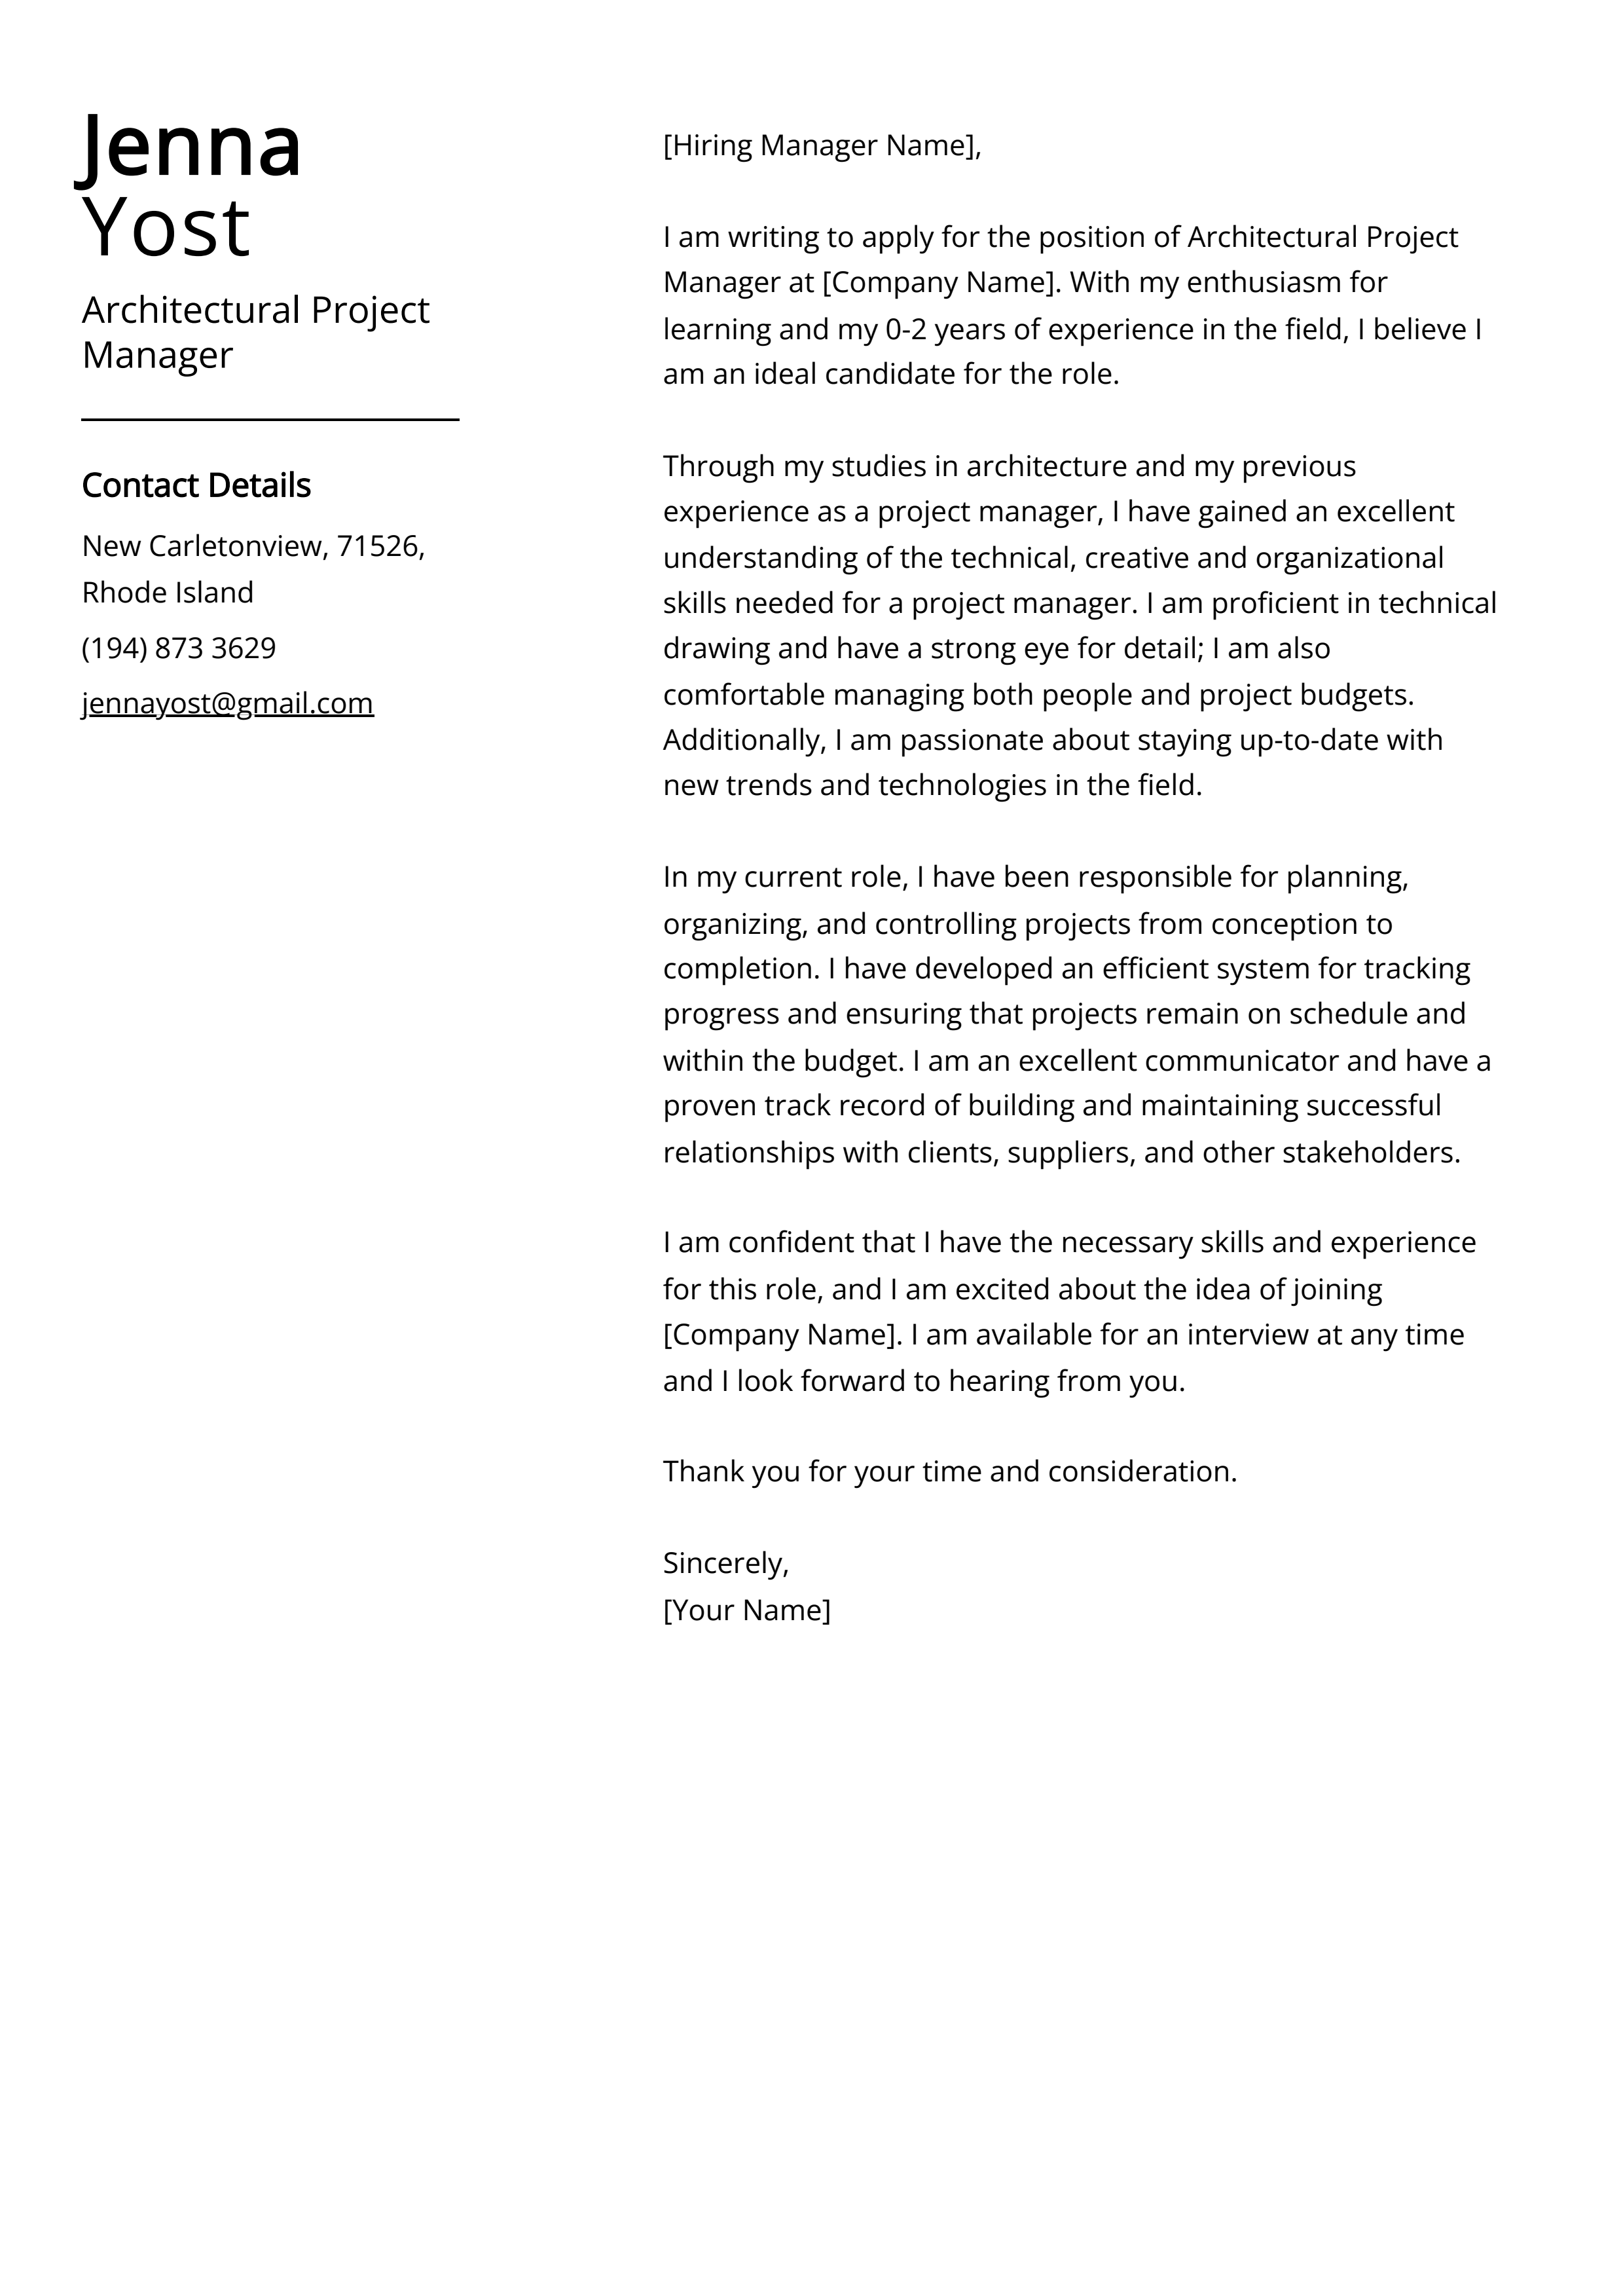 Architectural Project Manager Cover Letter Example